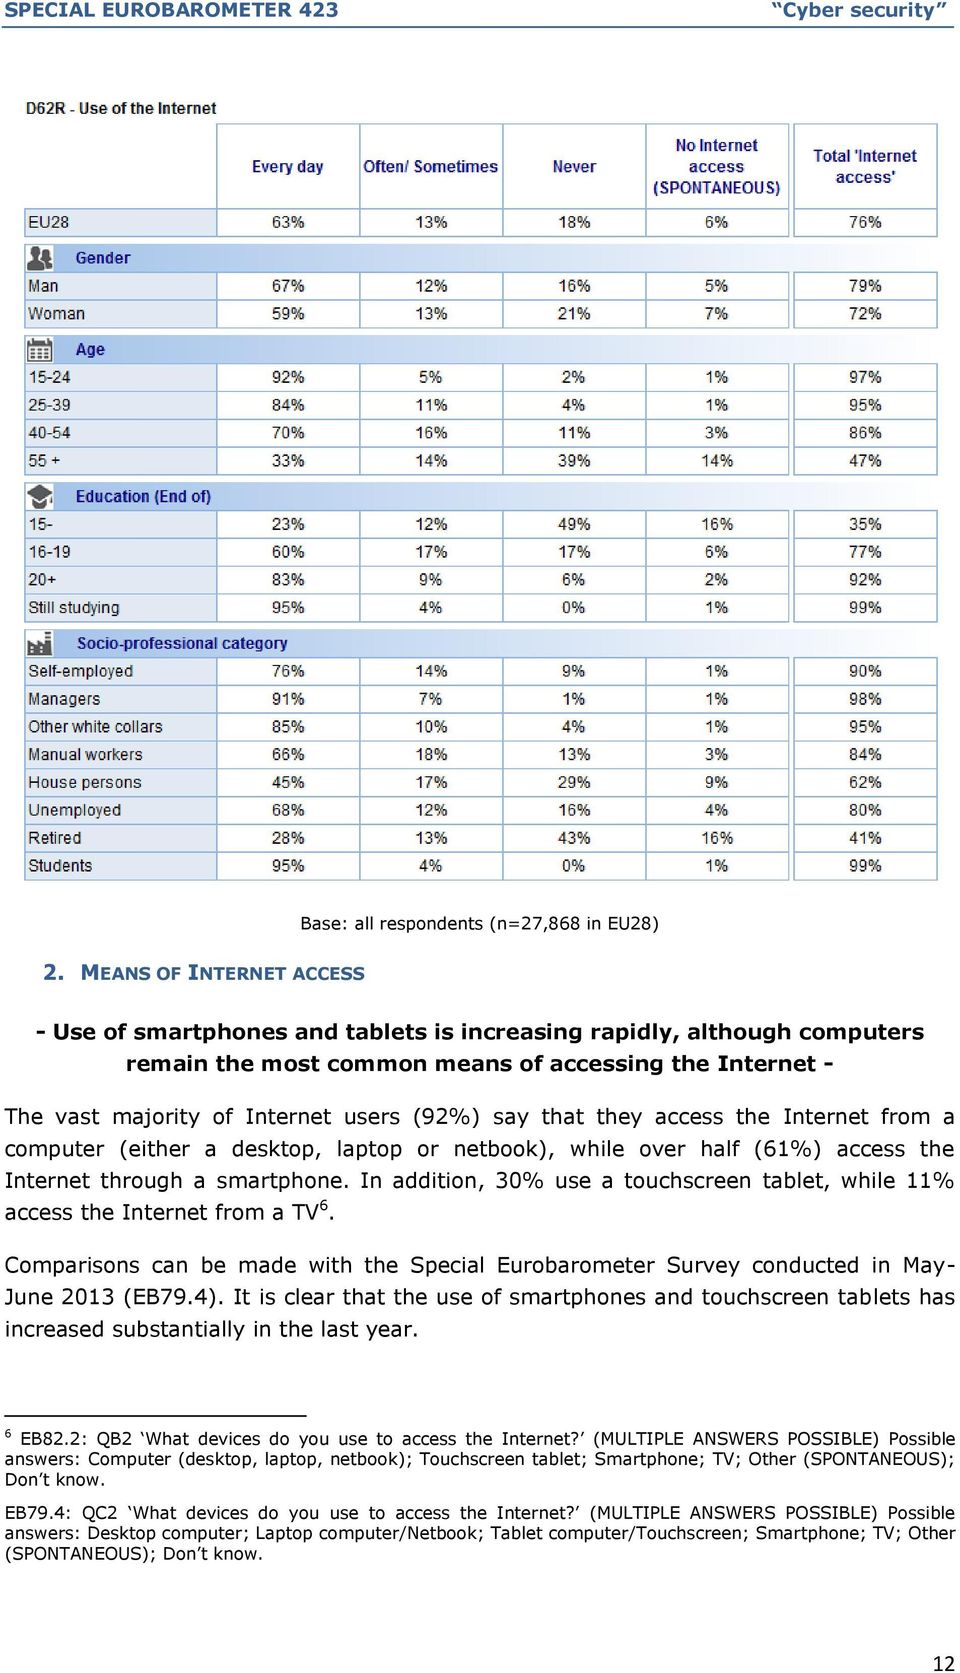 say that they access the Internet from a computer (either a desktop, laptop or netbook), while over half (61%) access the Internet through a smartphone.